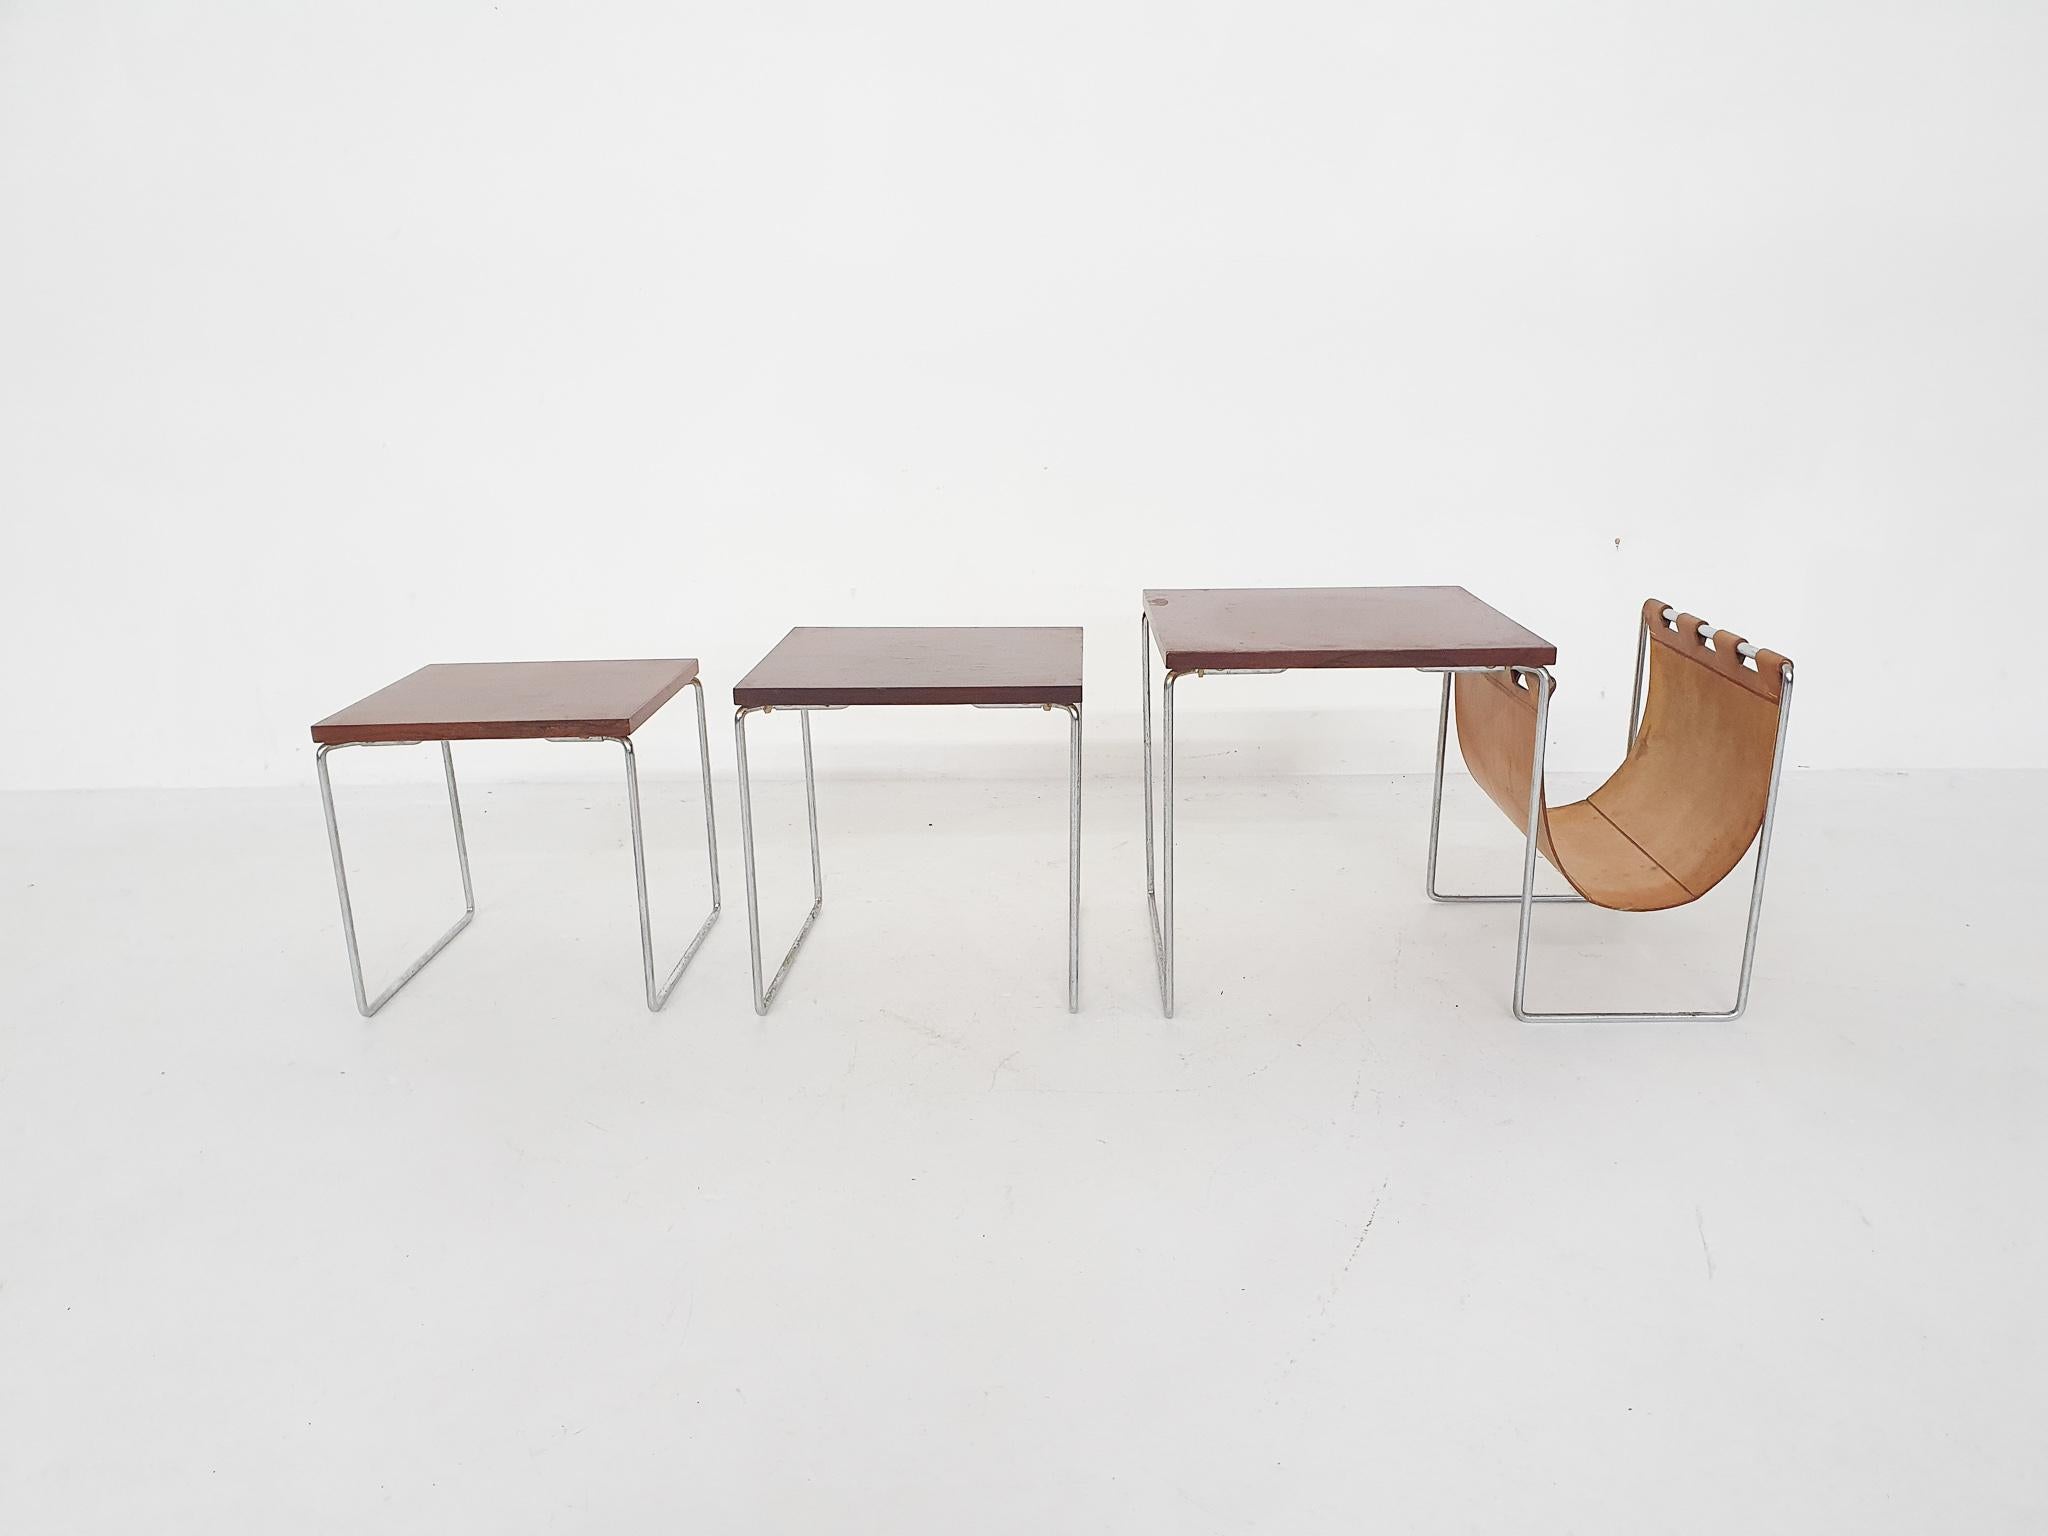 Set of three wood veneer and metal nesting tables. The large one has a cognac saddle leather magazine rack.
Some traces of use. It looks like the wooden tops have been laquered once
Measures: Large: 56 x 34.5 x 37cm (L x W x H)
Middle: 32.5 x